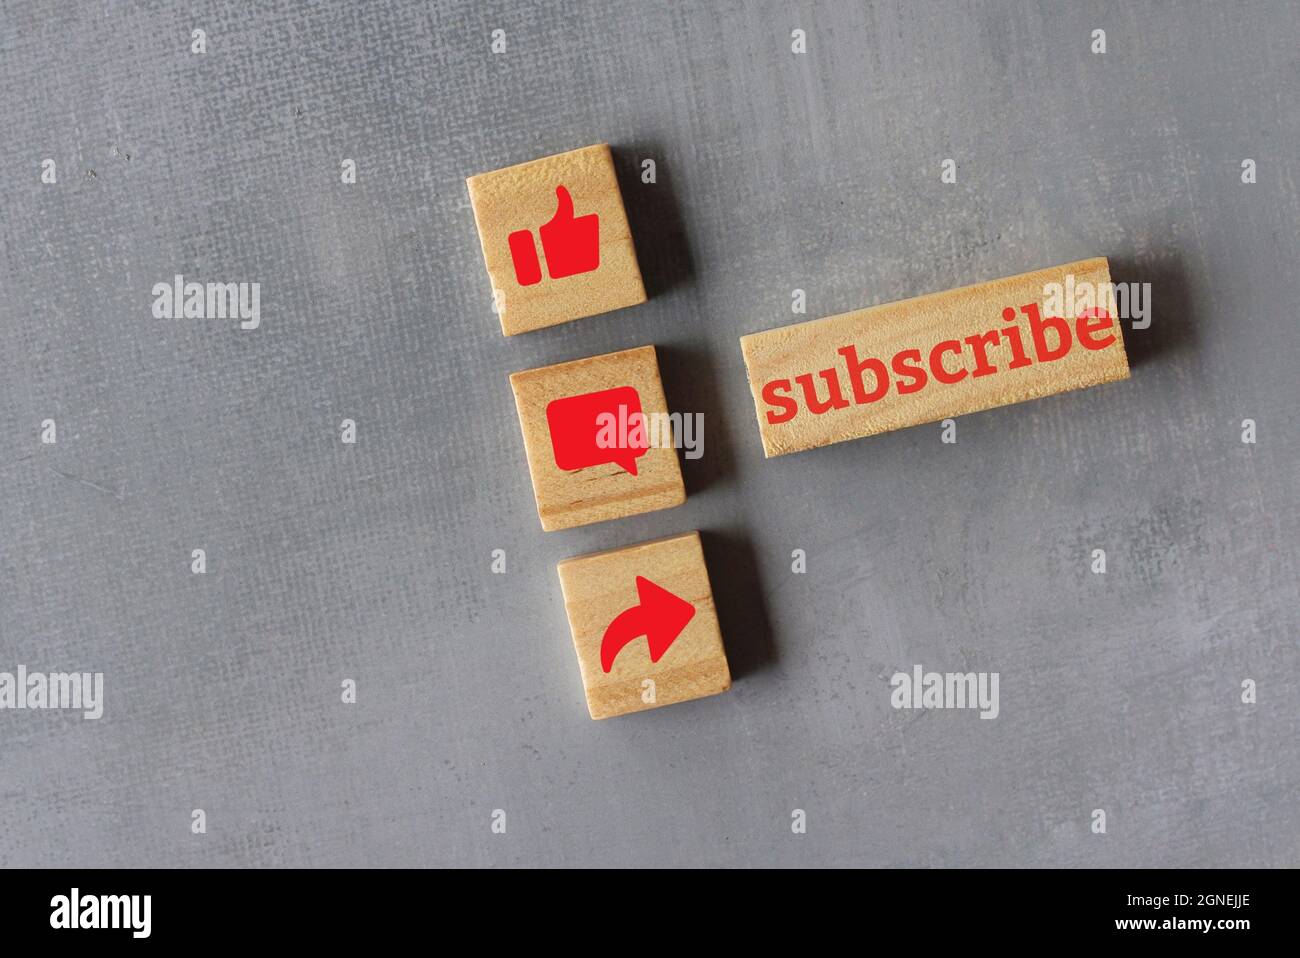 Technology and media social concept. Top view of wooden cubes with text SUBSCRIBE and like, comment and share icon. Stock Photo